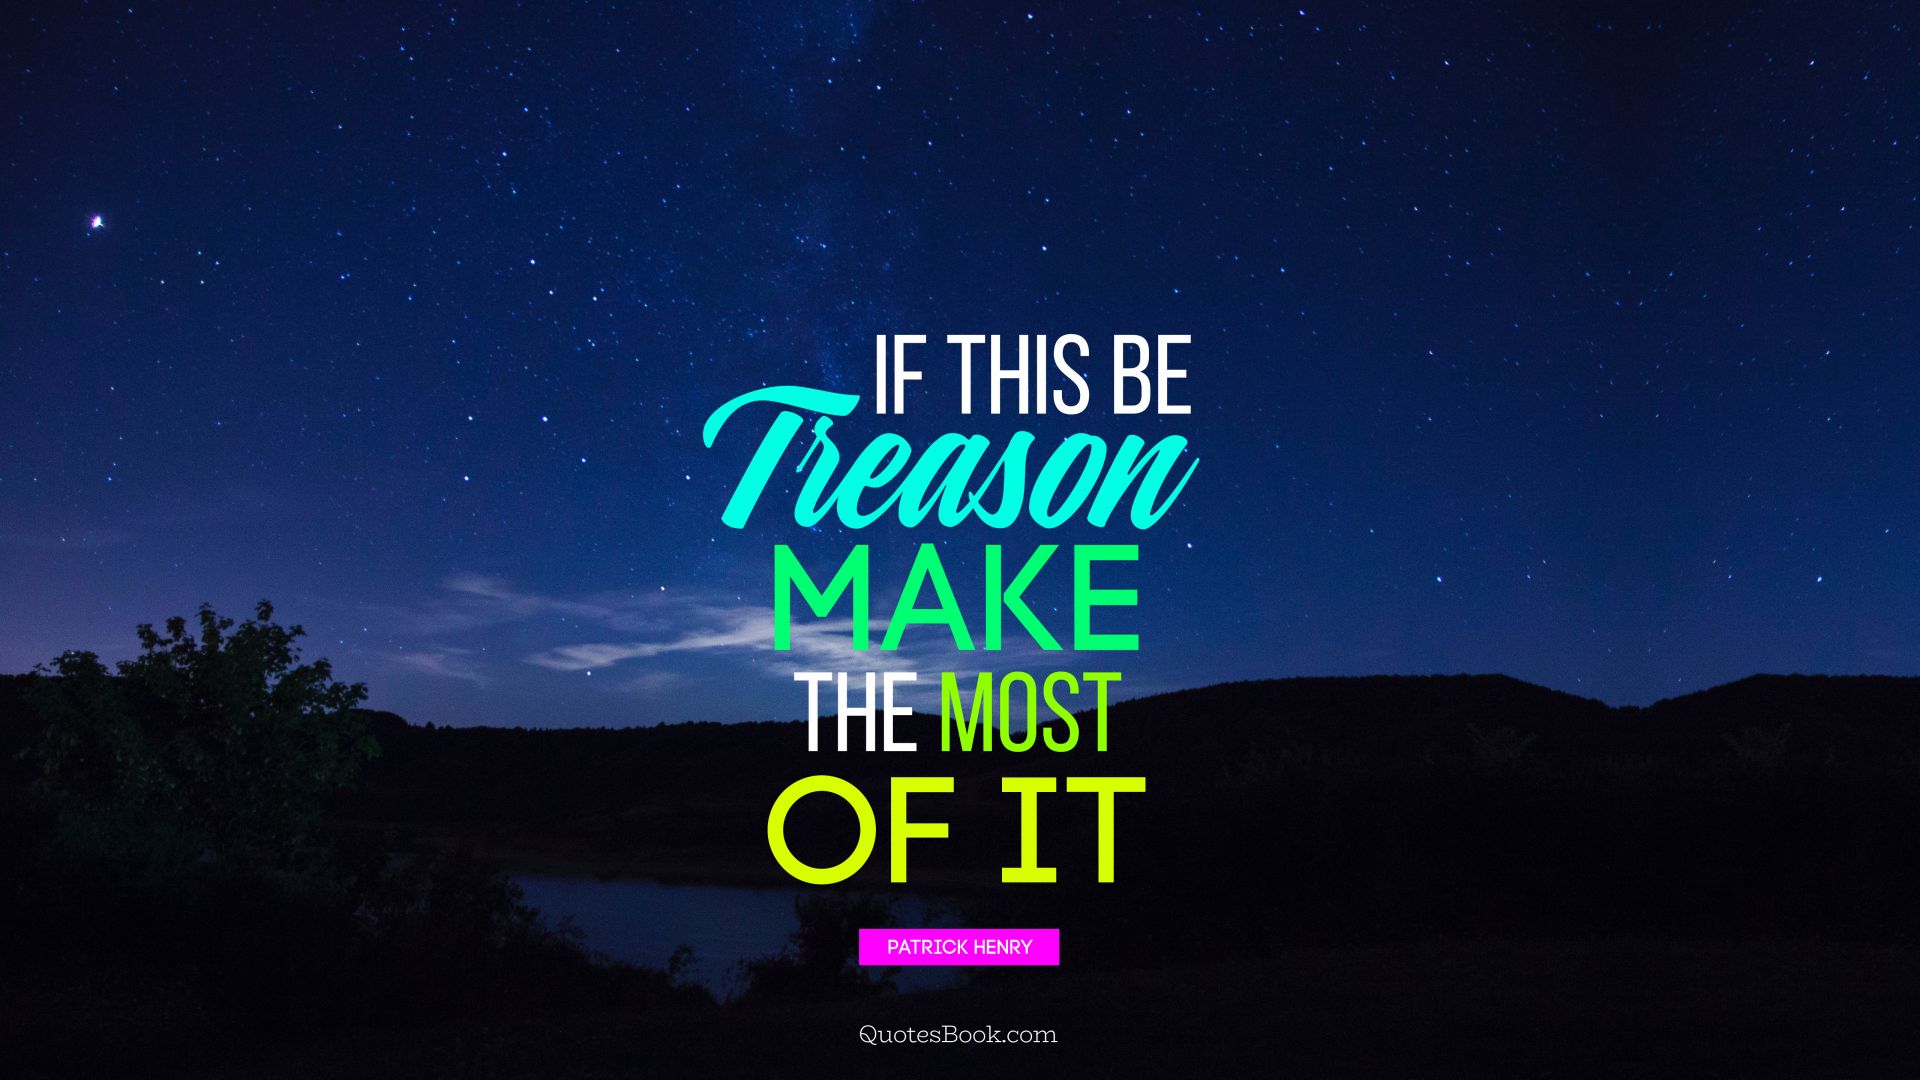 If this be treason make the most of it. - Quote by Patrick Henry